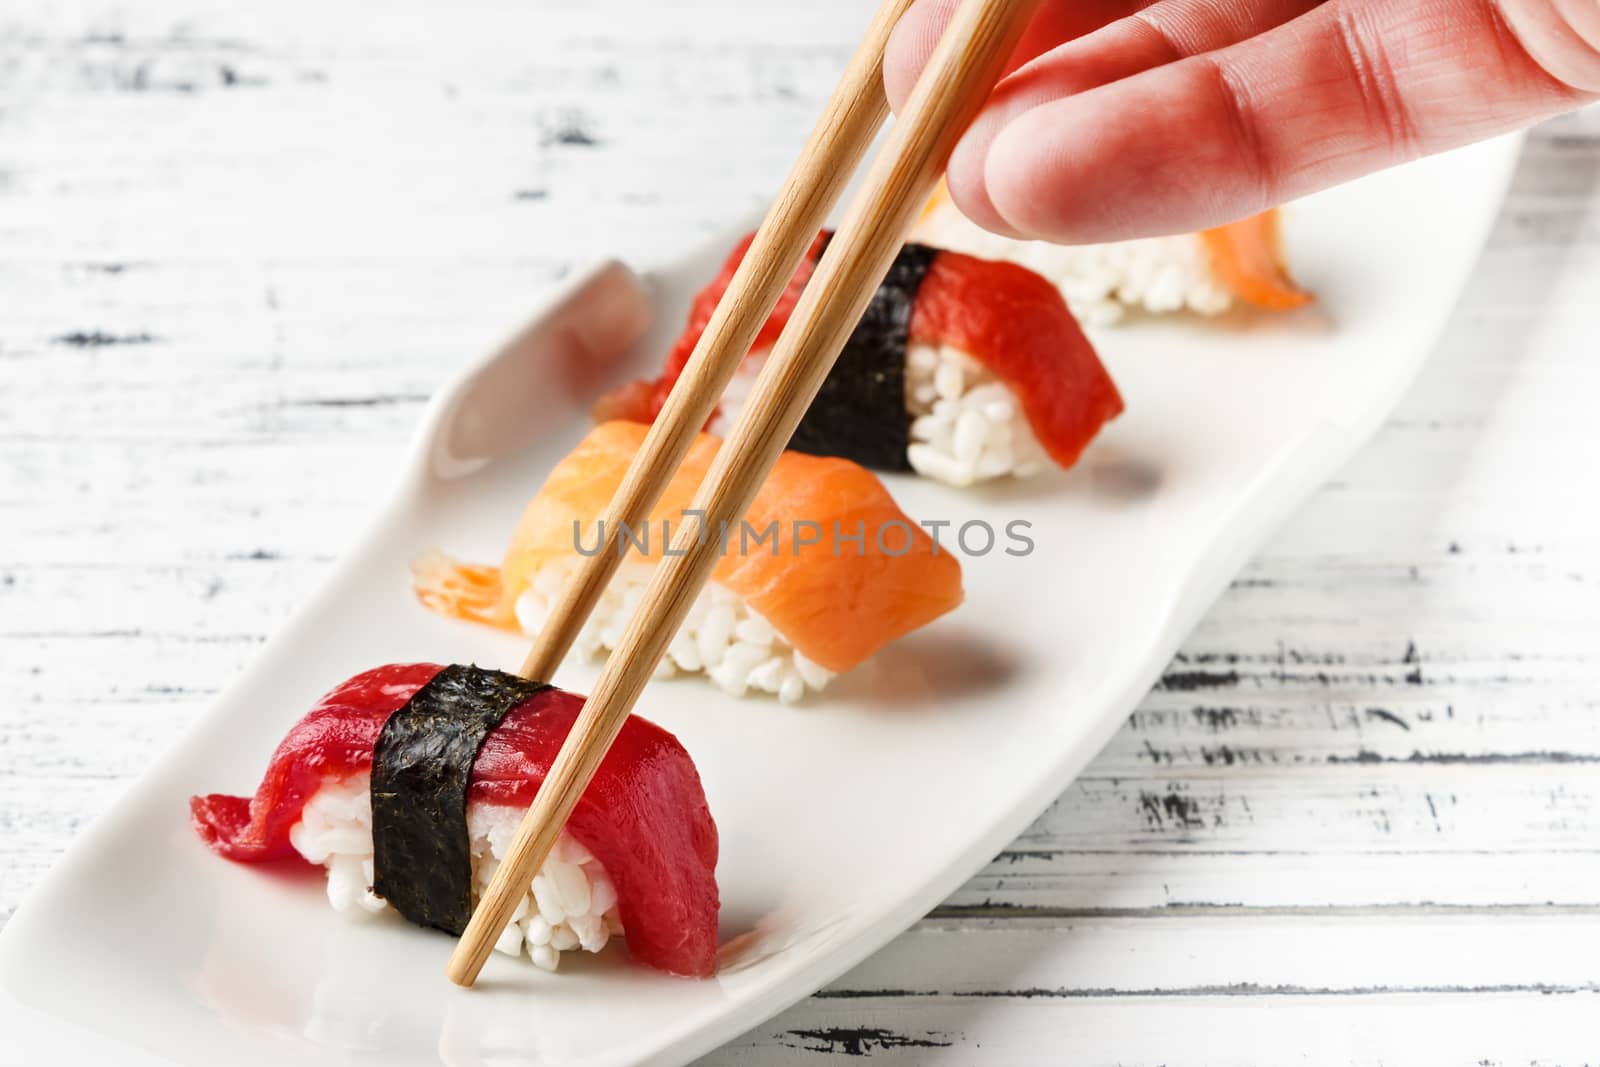  Set of salmon and red tuna Nigiris on white plate over old white wood with chopsticks. Raw fish in traditional Japanese sushi style. Horizontal image.